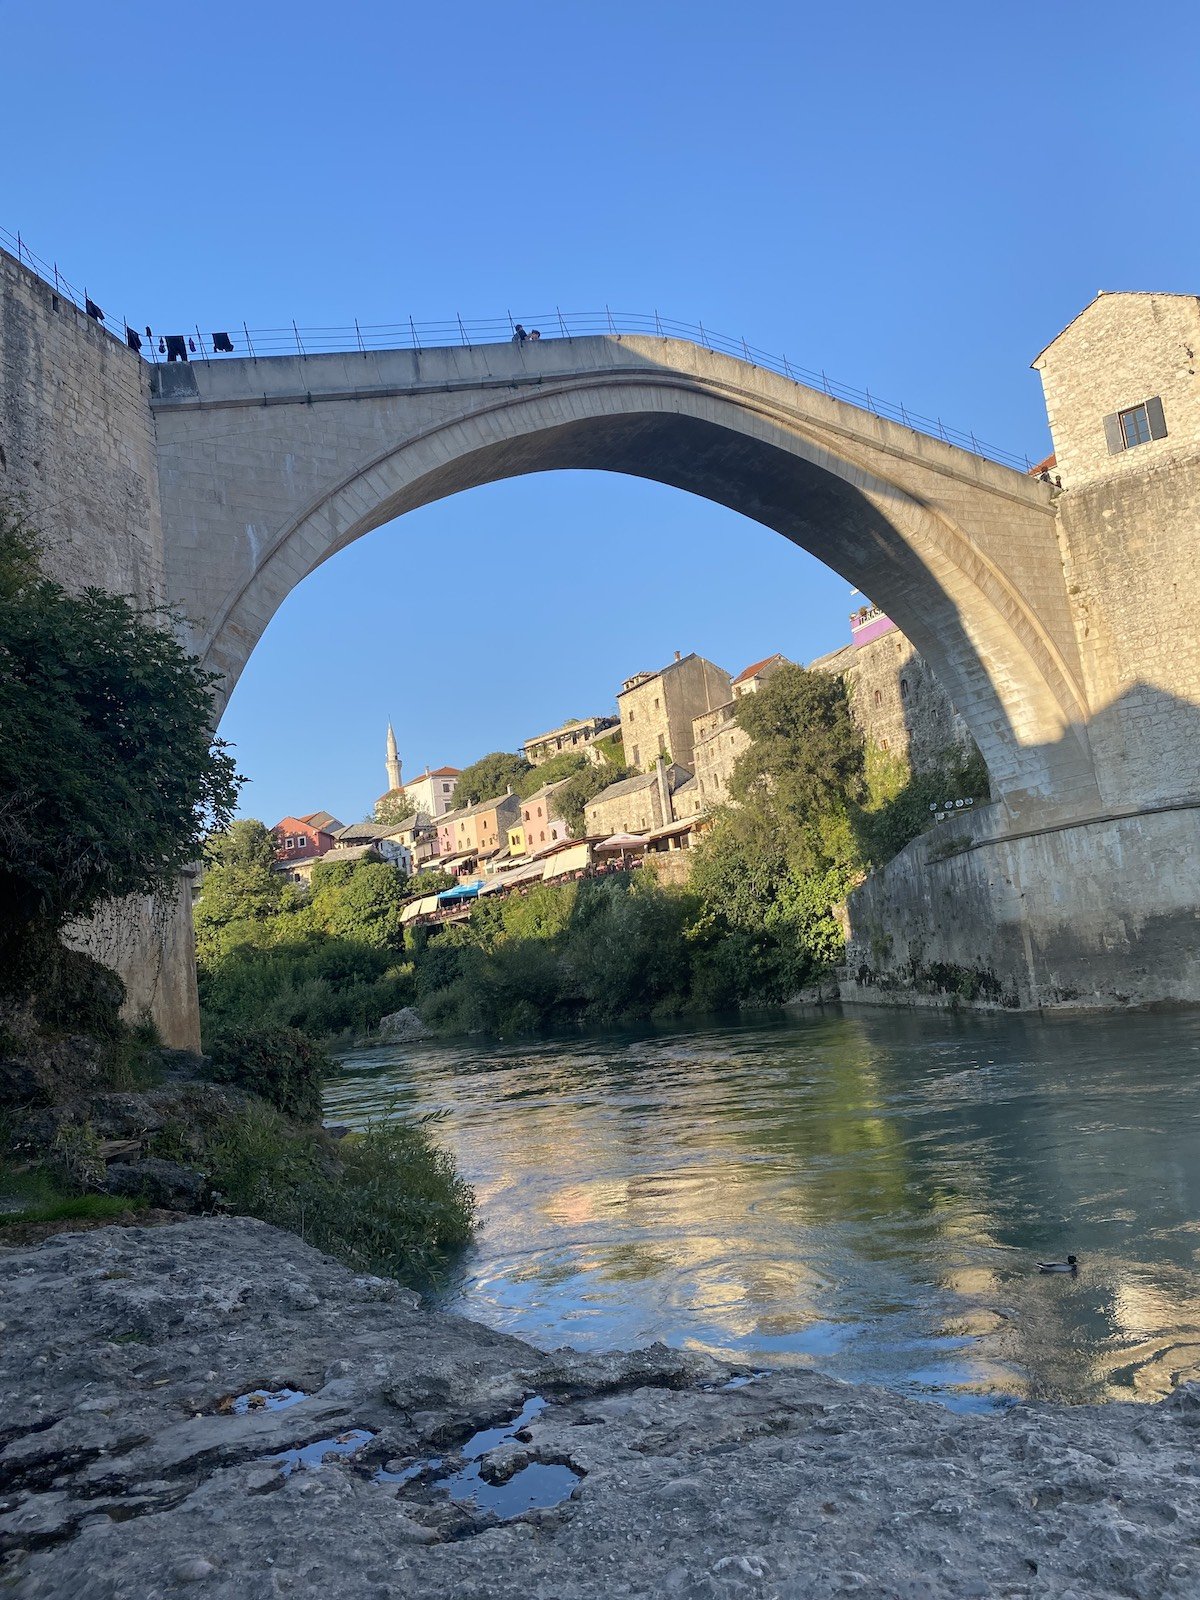 Enjoy day trips from Dubrovnik to Mostar and explore the old bridge in Bosnia and Herzegovina.